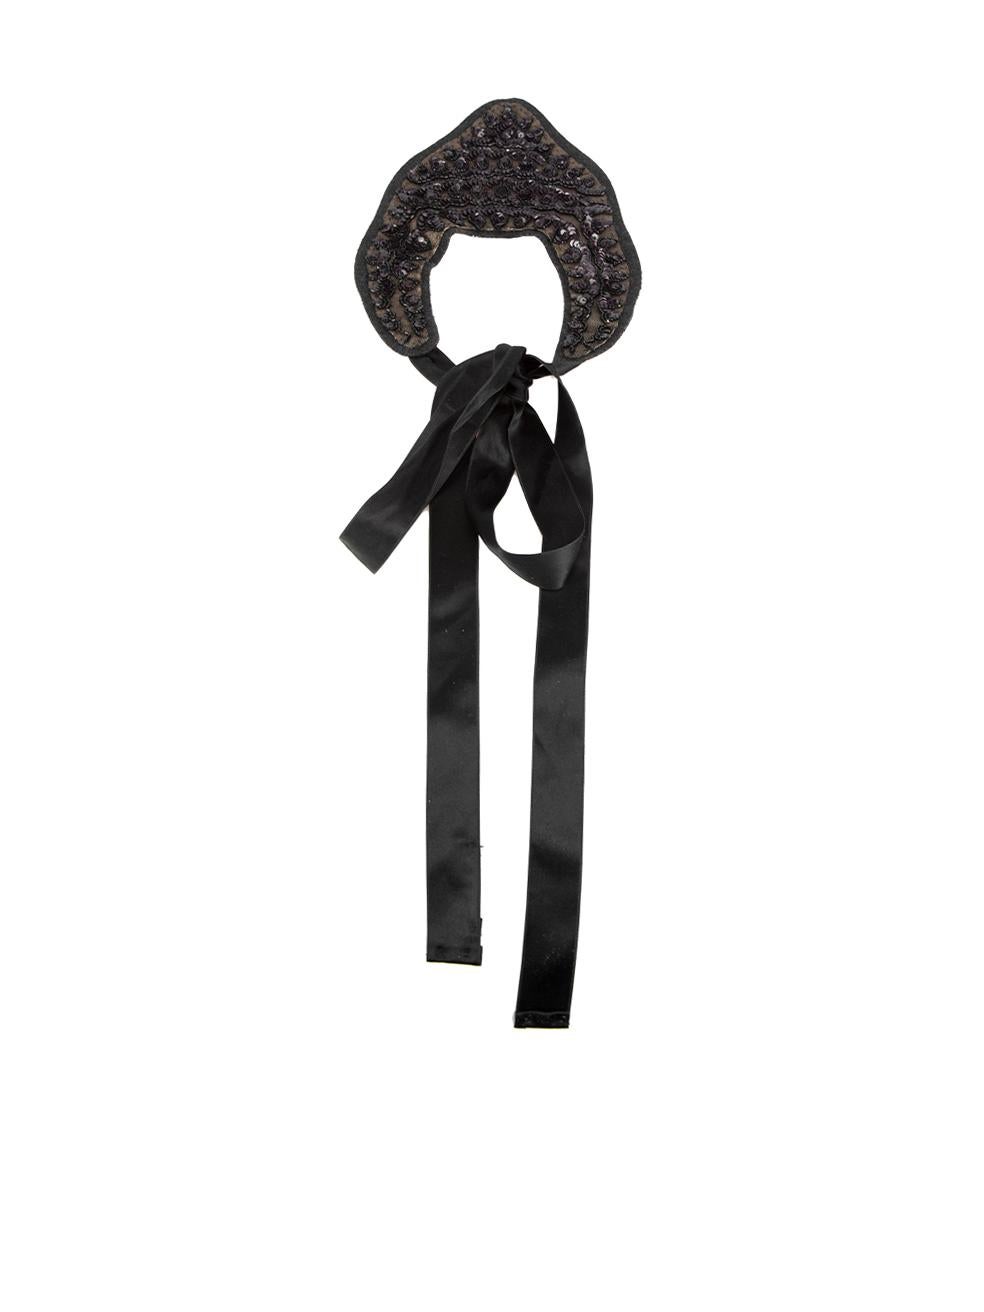 Marni Black Beaded Bib Necklace In Good Condition For Sale In London, GB